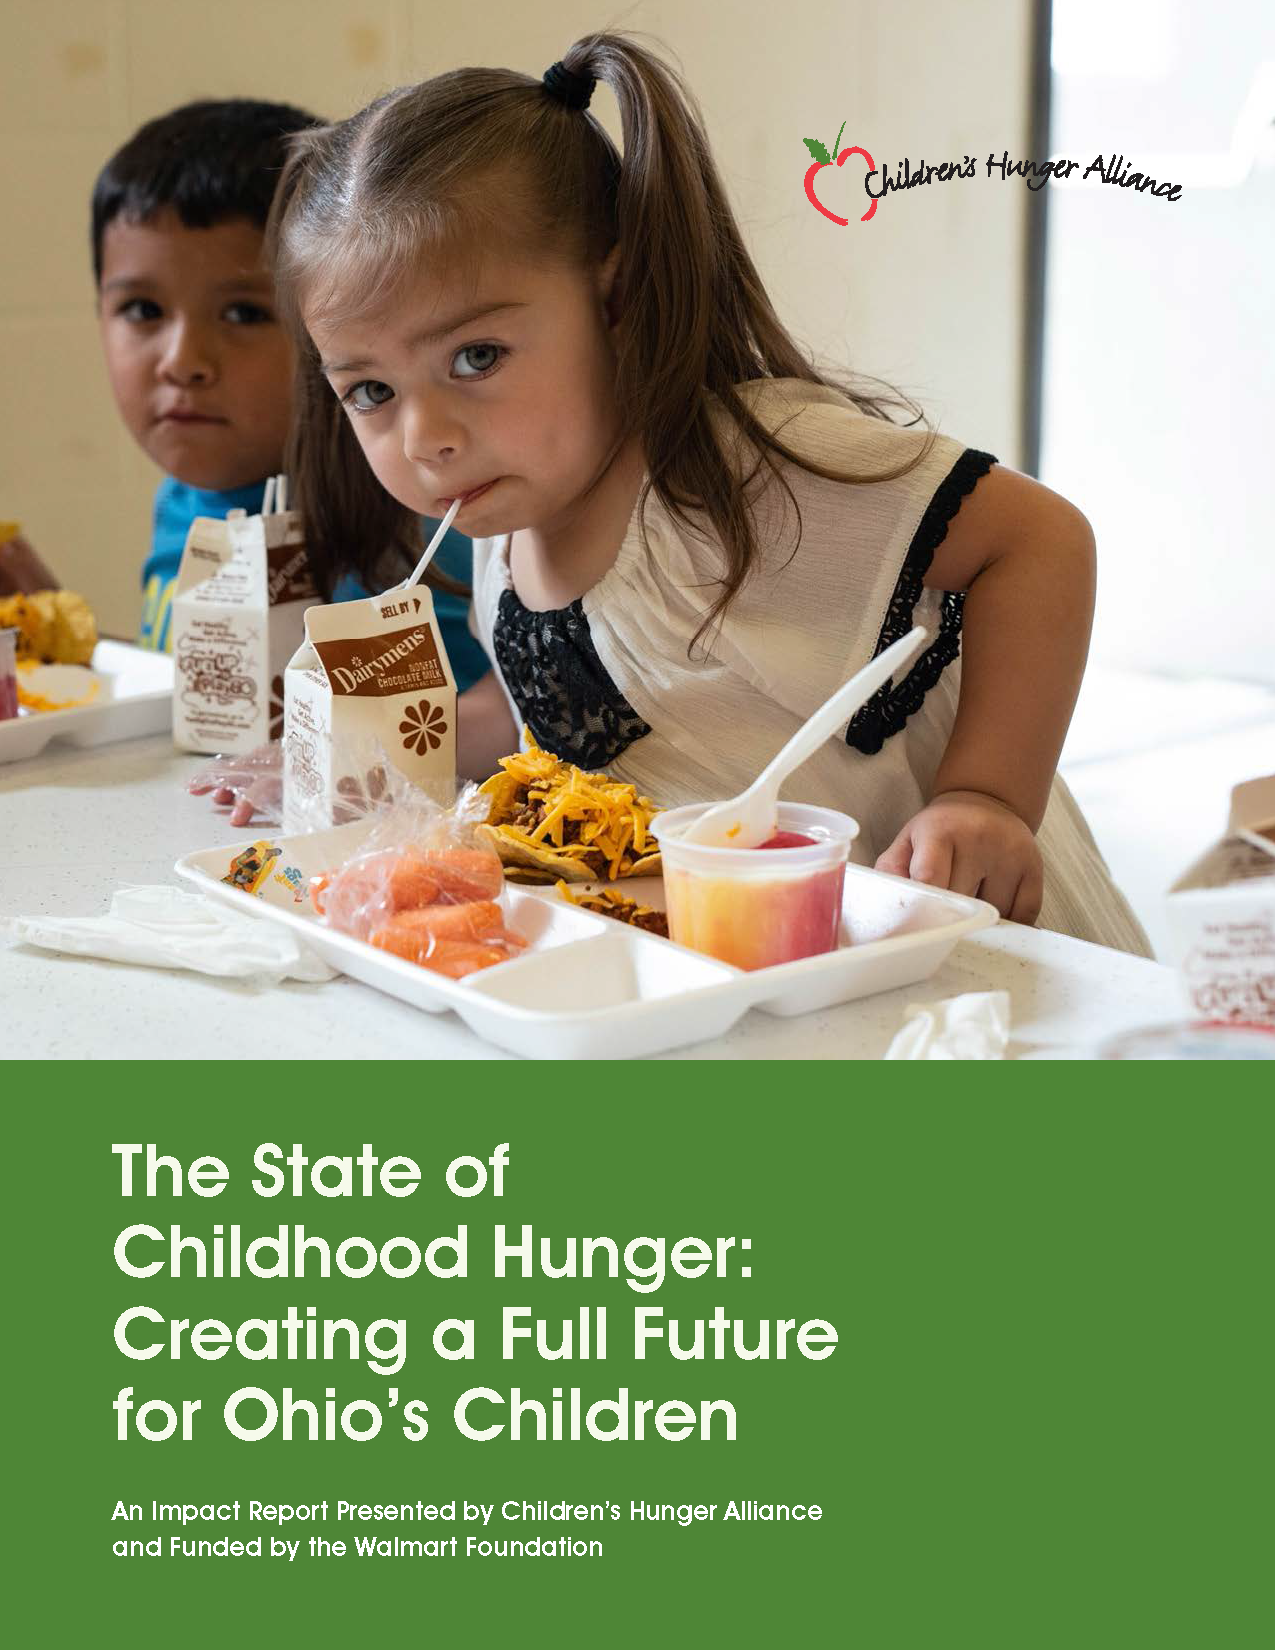 Childrens-Hunger-Alliance-2018-Impact-Report-Cover_Page_01